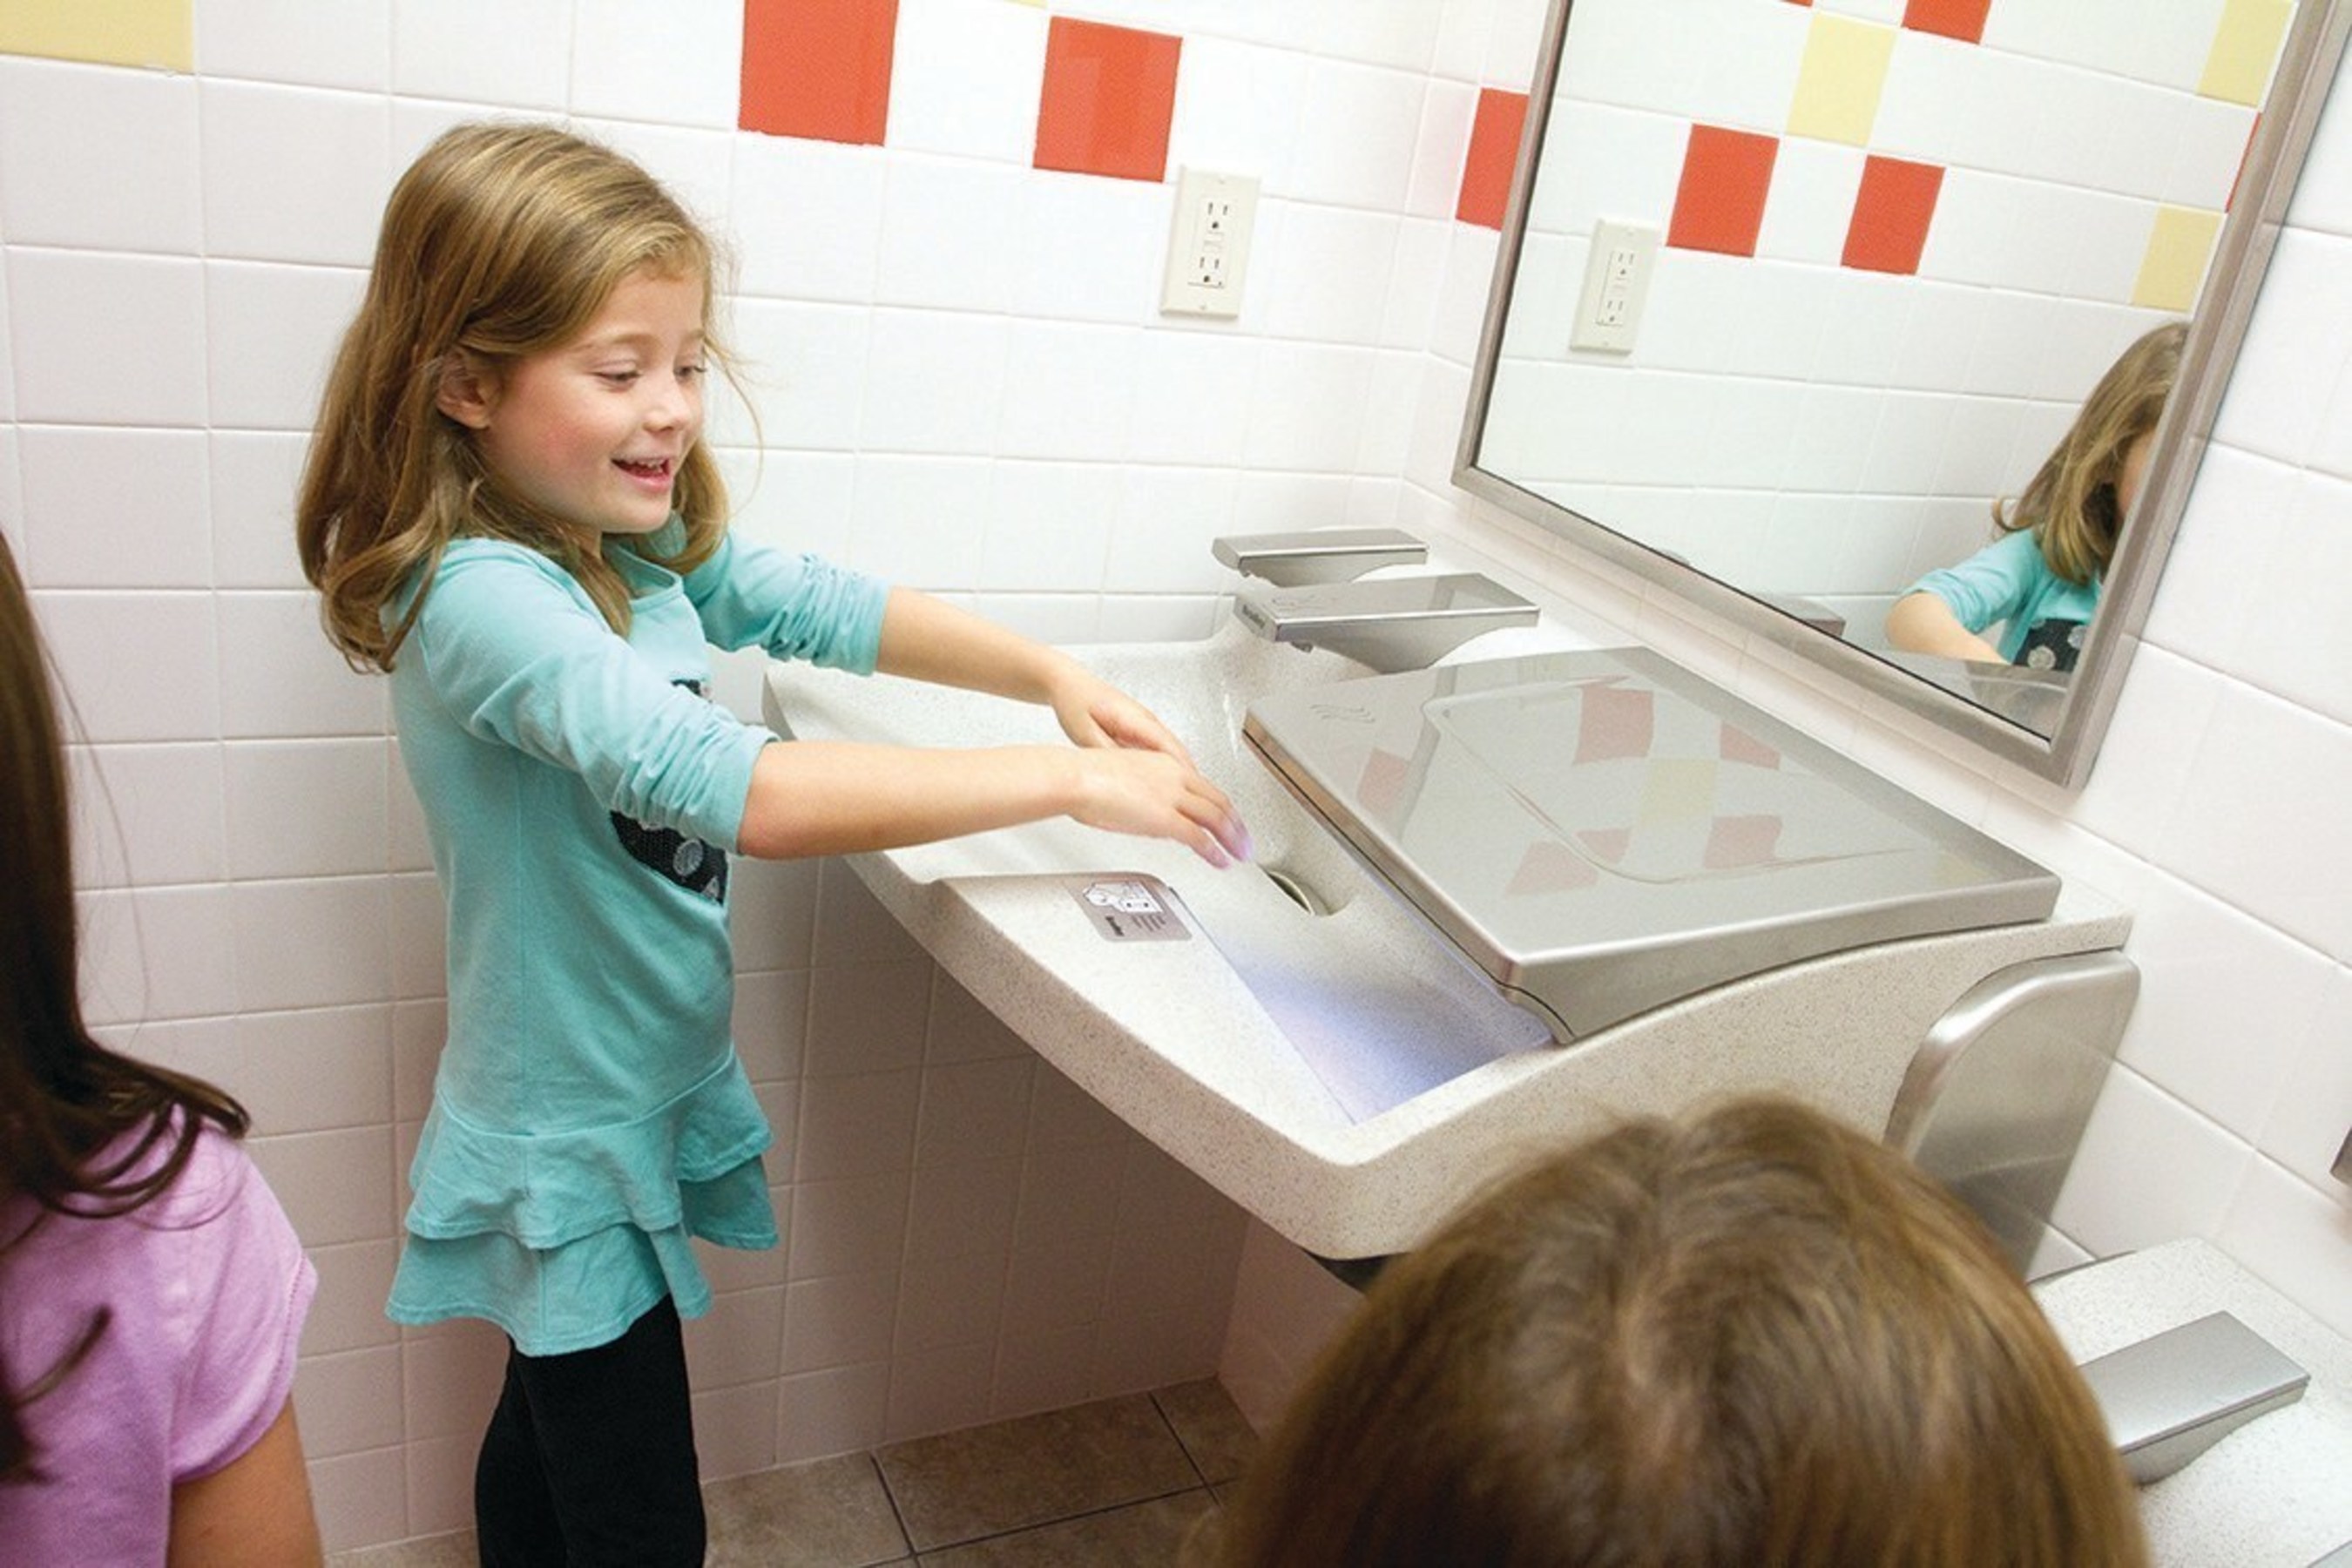 According to a national Healthy Hand Washing Survey conducted by Bradley Corporation, 70% of parents plan to talk to their children about the importance of hand washing before sending them back to school.